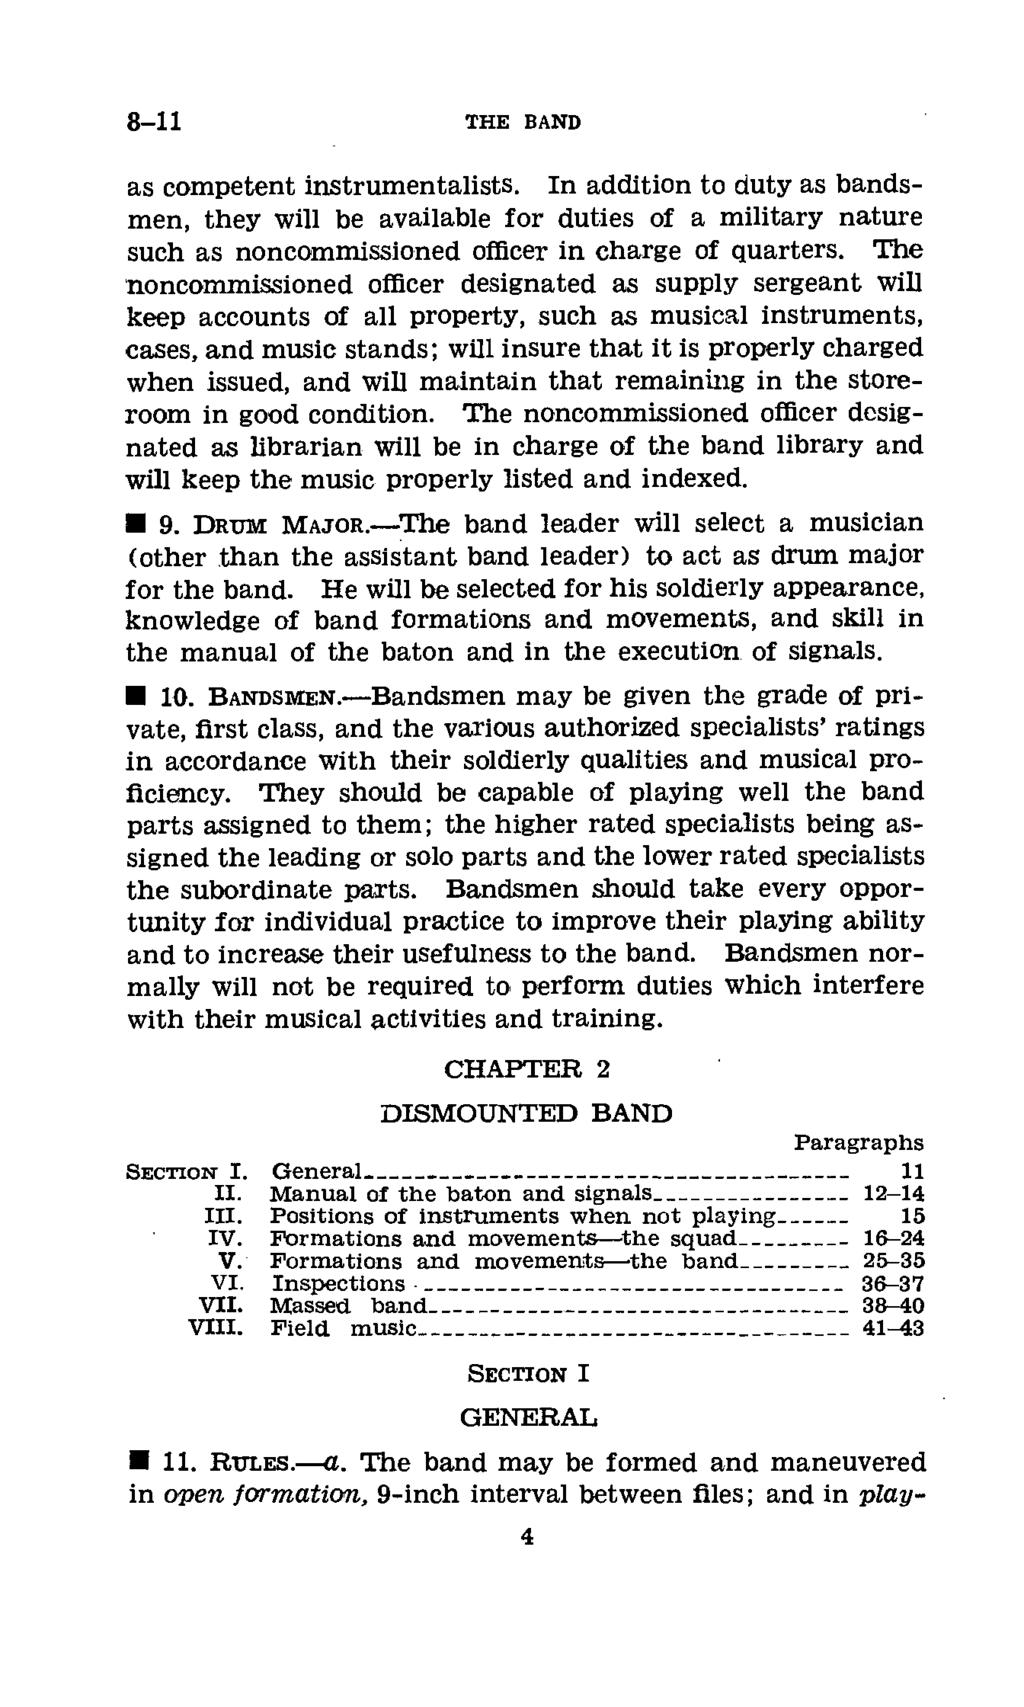 8-11 THE BAND as competent instrumentalists. In addition to duty as bandsmen, they will be available for duties of a military nature such as noncommissioned officer in charge of quarters.